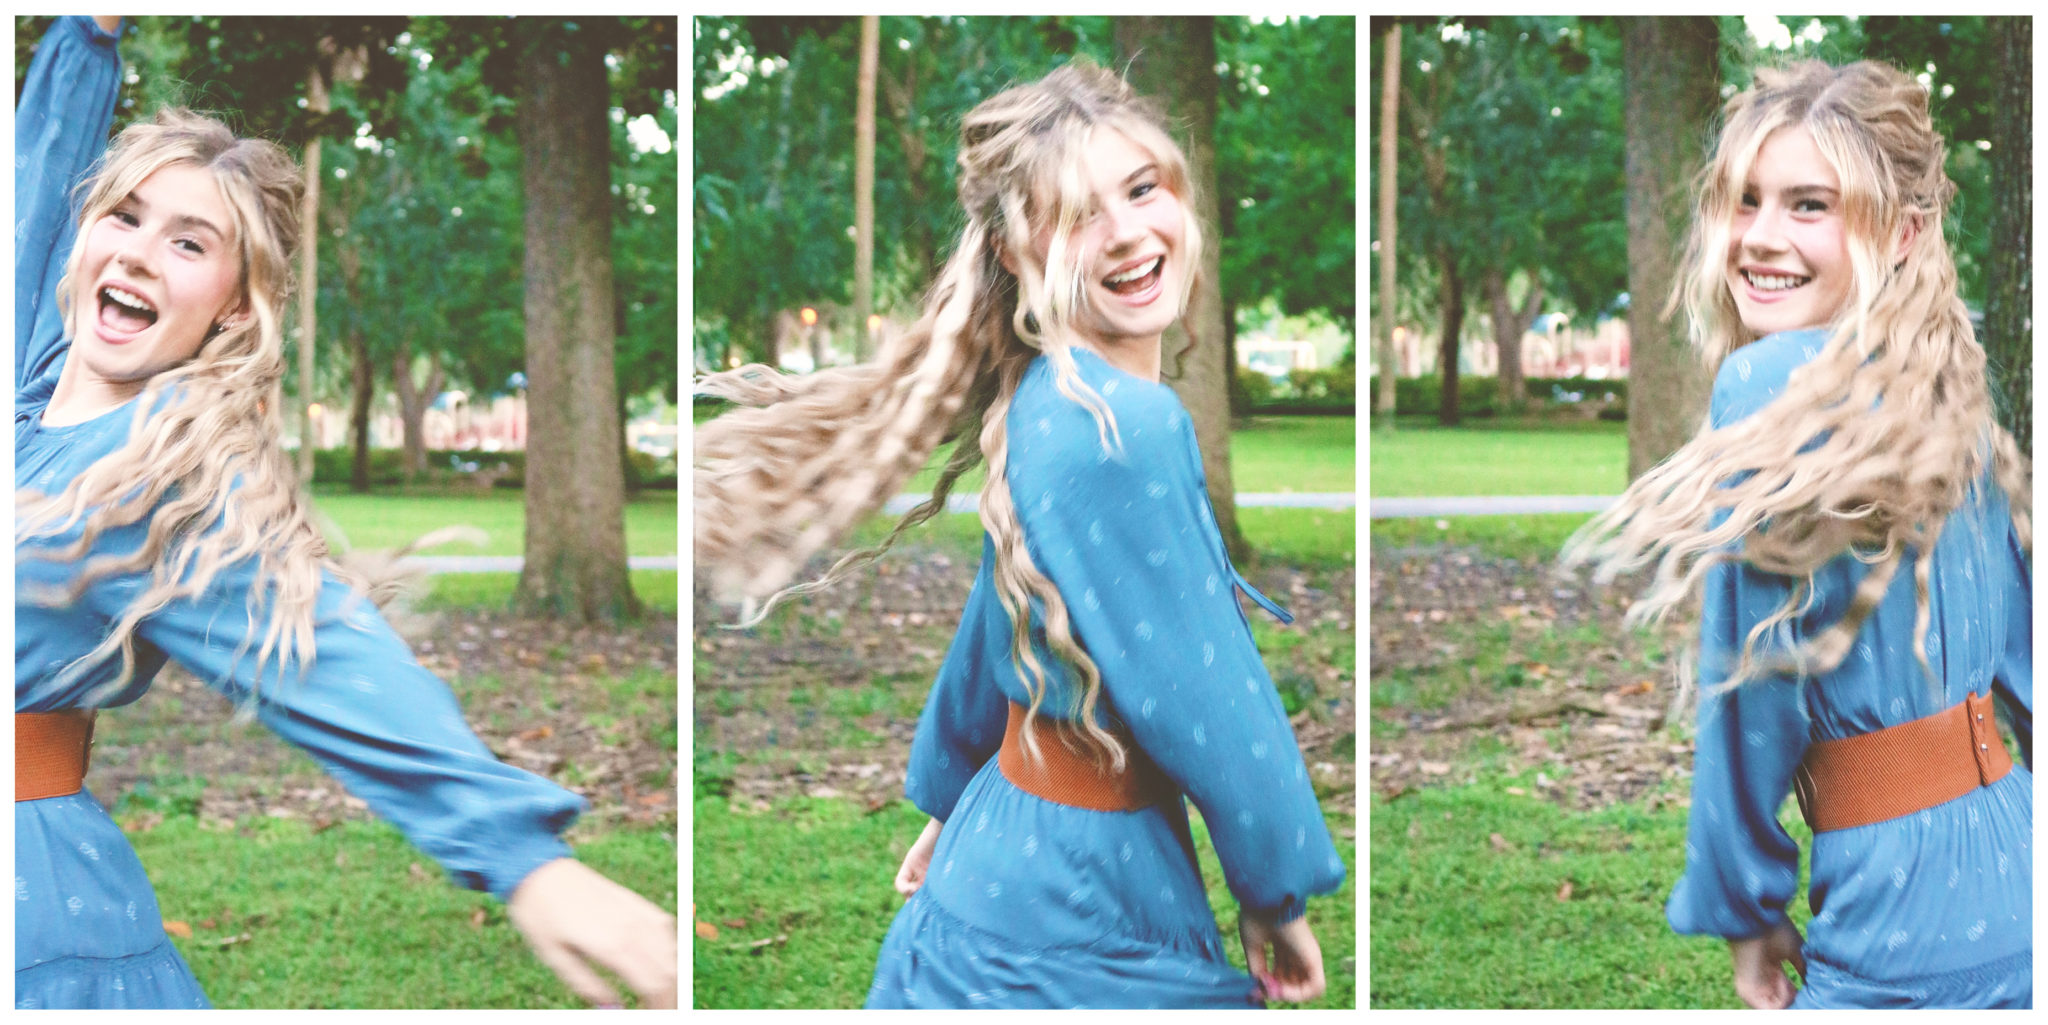 Image of girl with long blonde hair wearing a long blue dress twirling through the trees